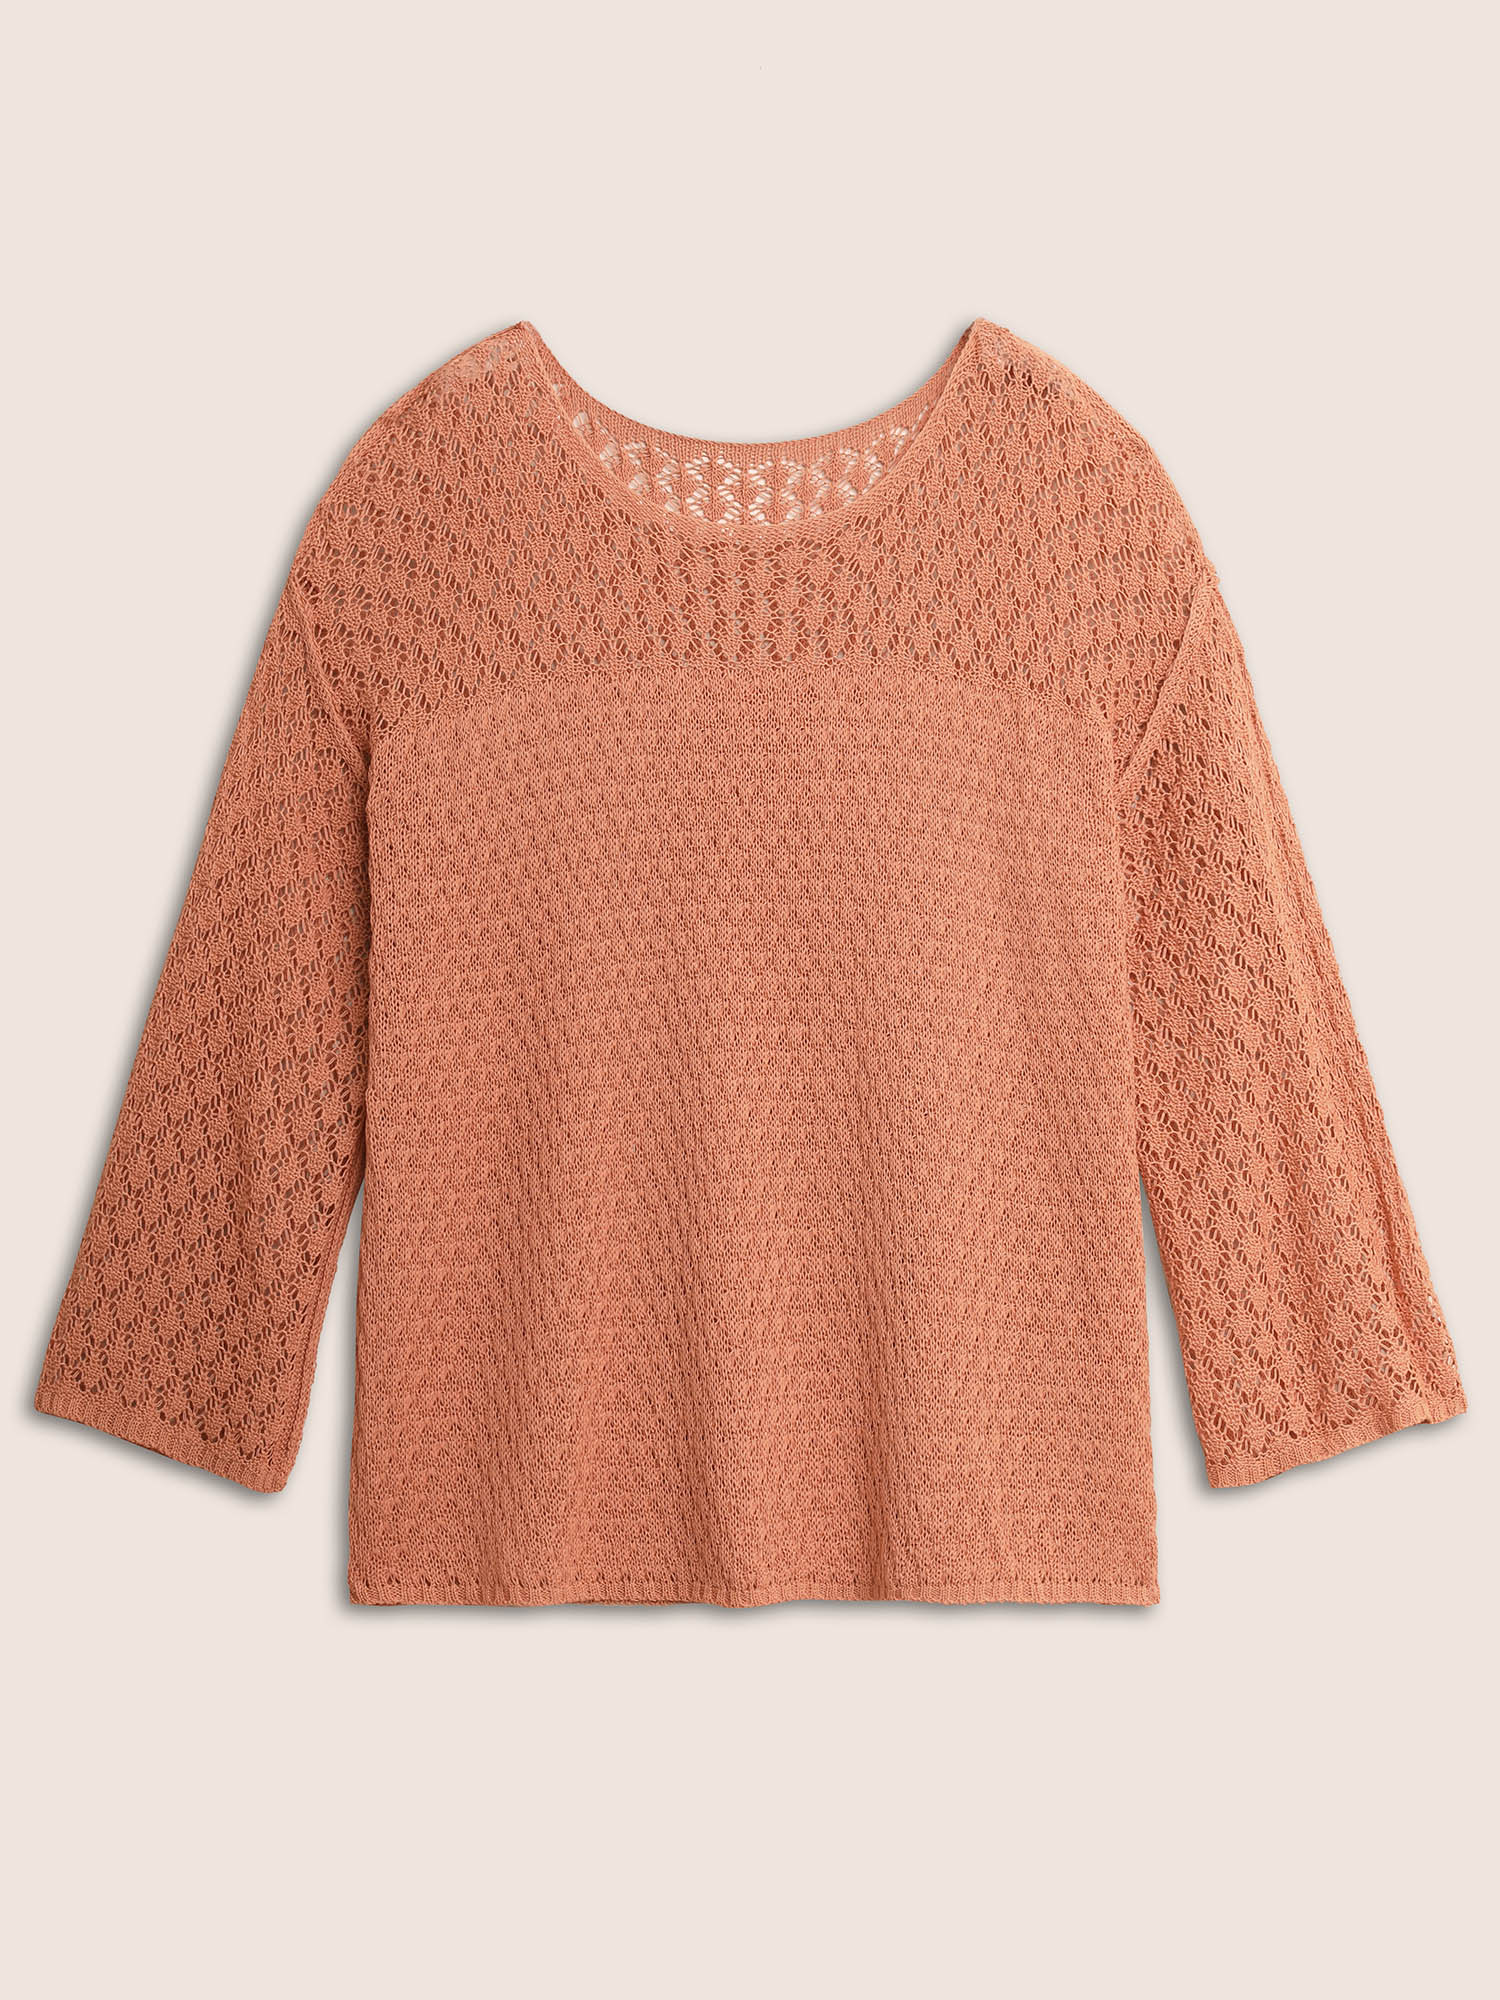 

Plus Size Texture Cut Out See Through Sweater T-shirt Coral Long Sleeve Round Neck Casual Knit Tops  Bloomchic